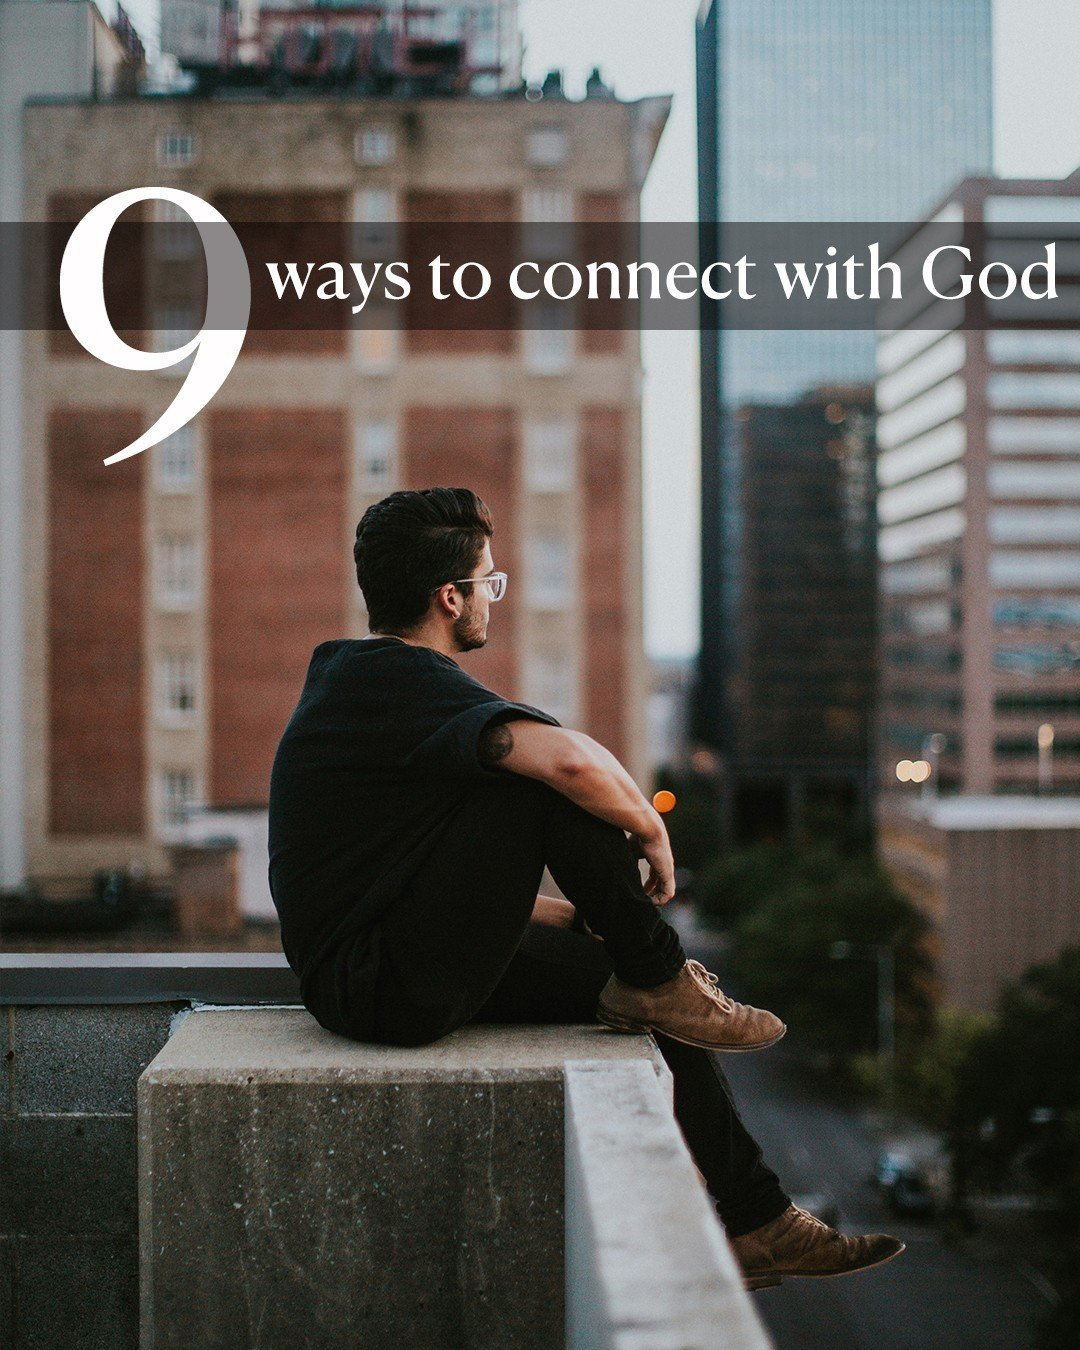 Do traditional quiet times not work for you? Take heart: there&rsquo;s a wide range of personal devotional styles found within Scripture and Christian history. In an article by Gary Thomas, we get insight into 9 distinct ways to connect with God. I h